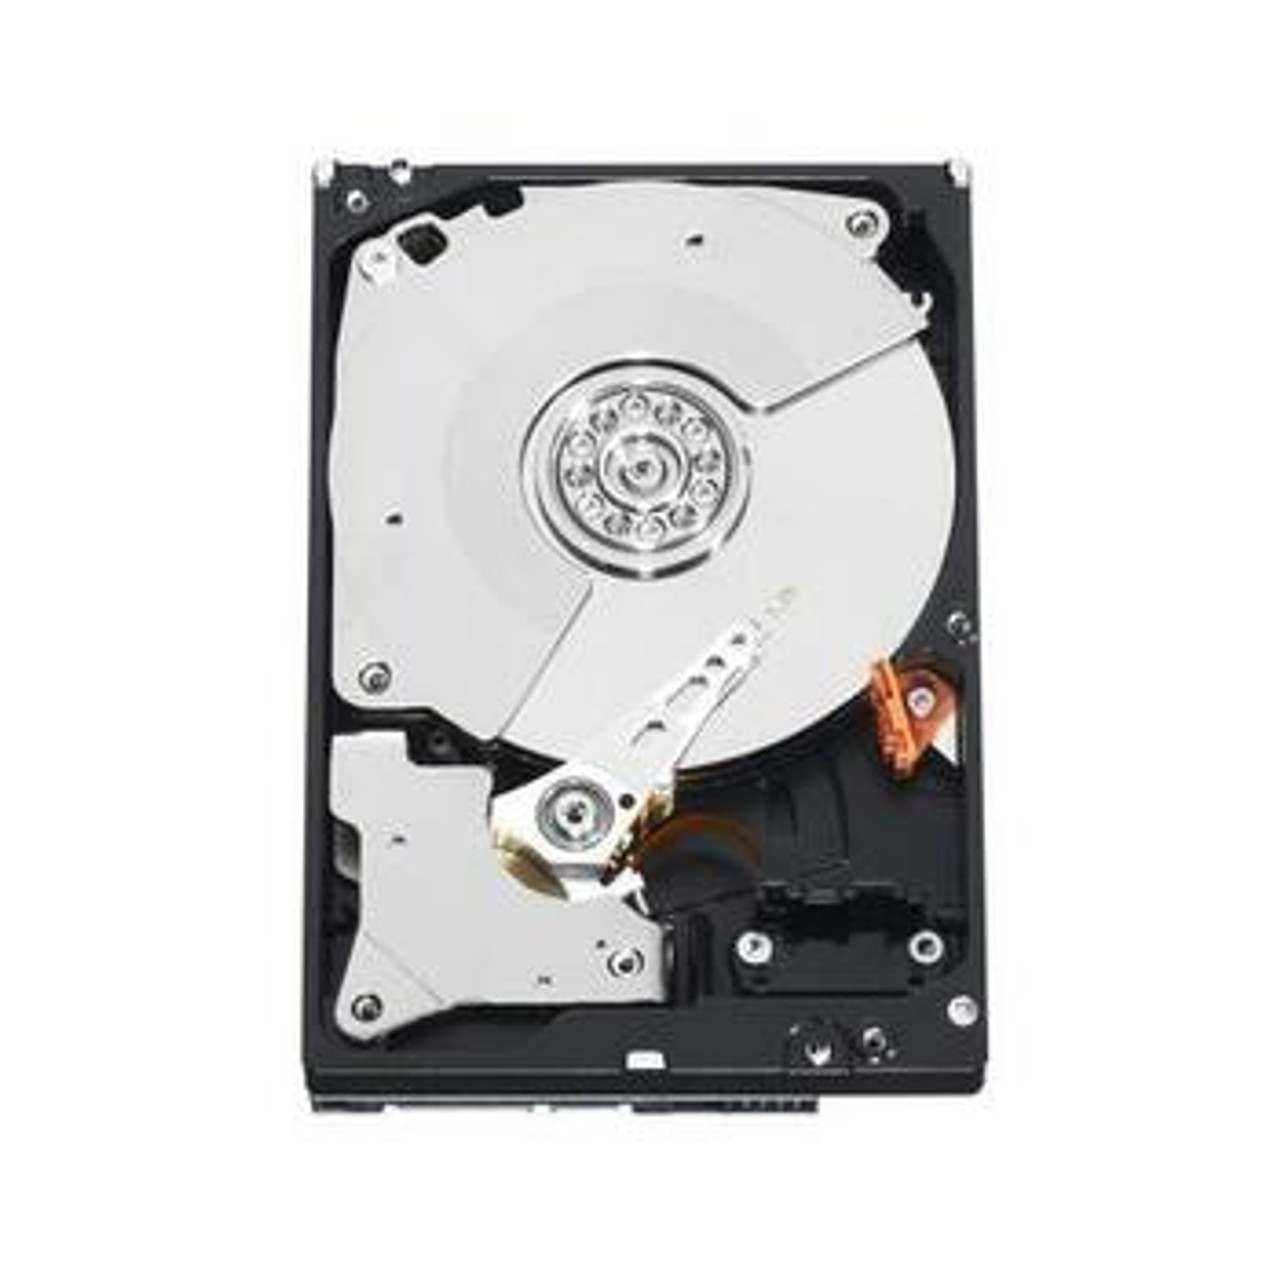 0TY782 Dell 250GB 7200RPM SATA 3.0 Gbps 3.5 8MB Cache Hard Drive